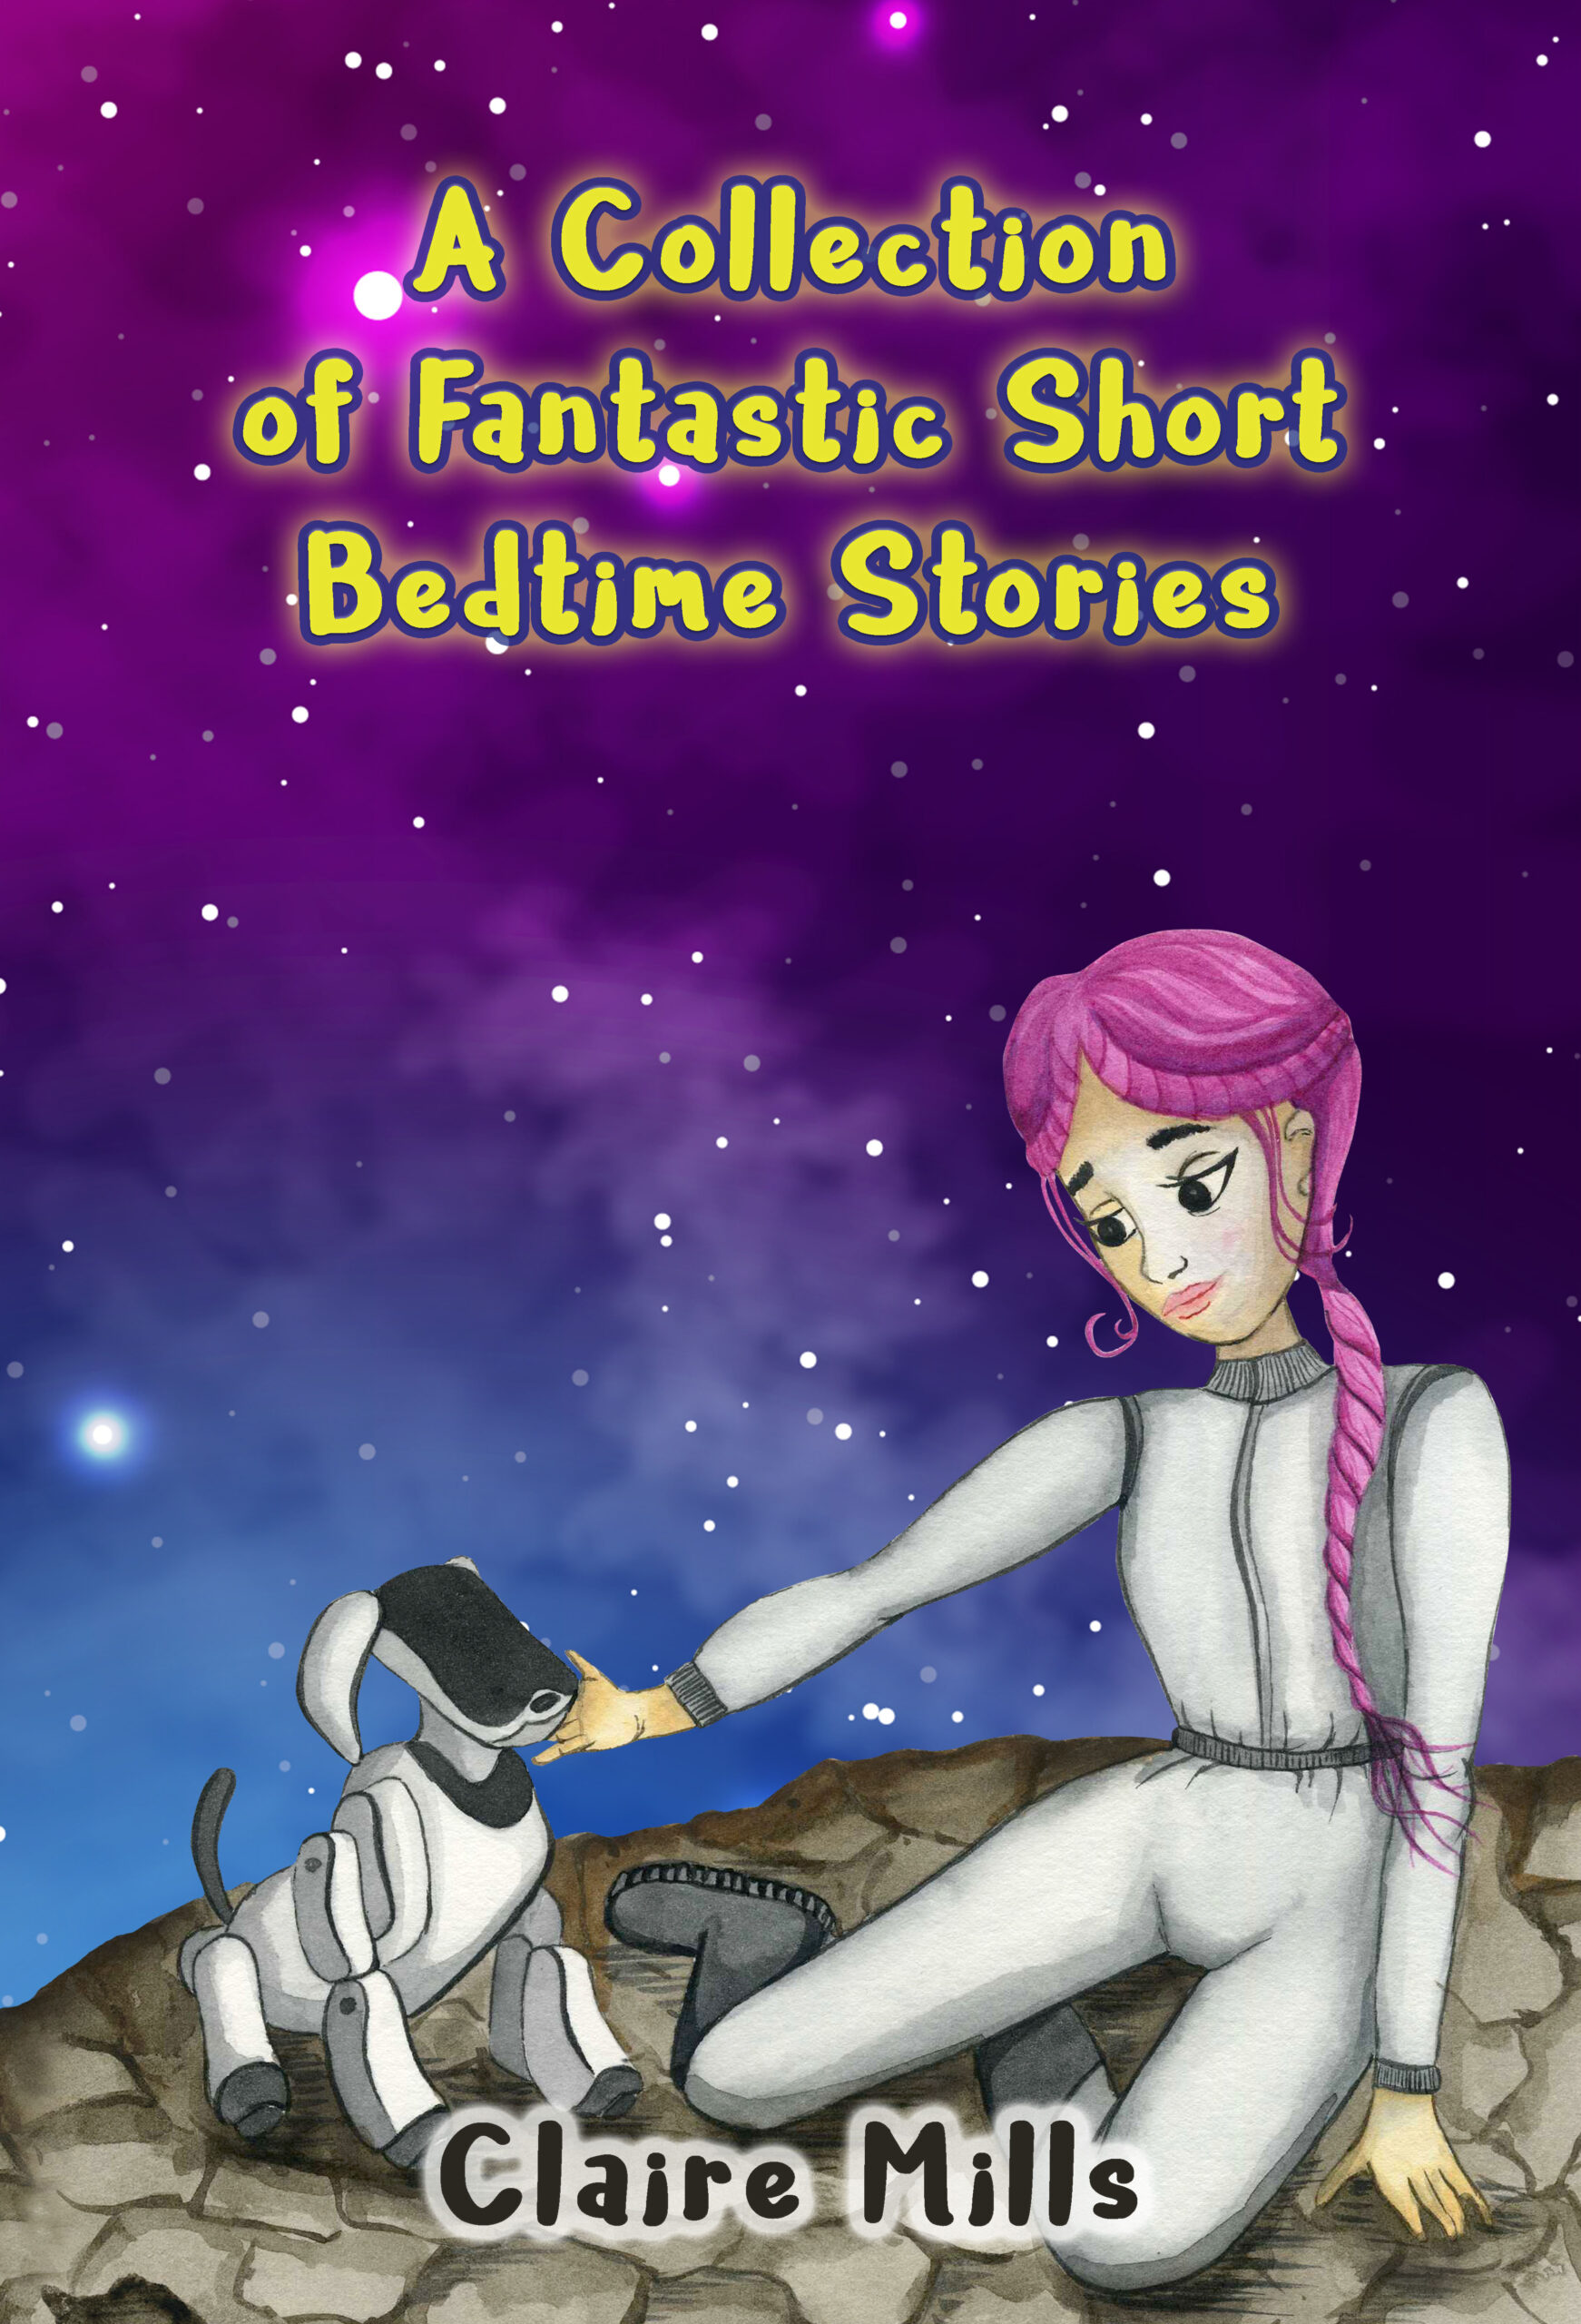 FREE: A Collection of Fantastic Short Bedtime Stories by Claire Mills